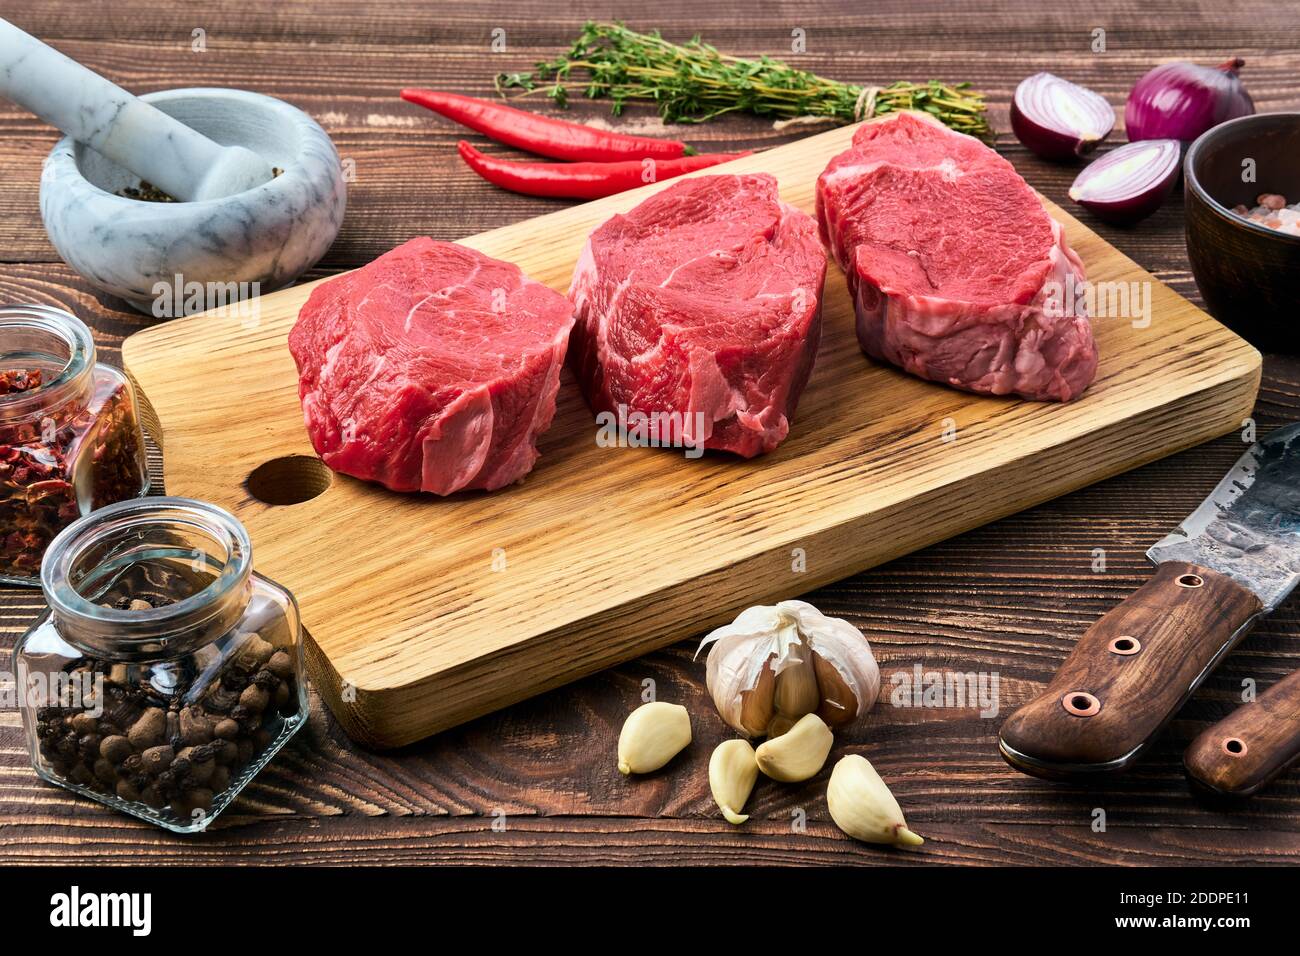 Marinated raw beef steak with spice on wooden table Stock Photo